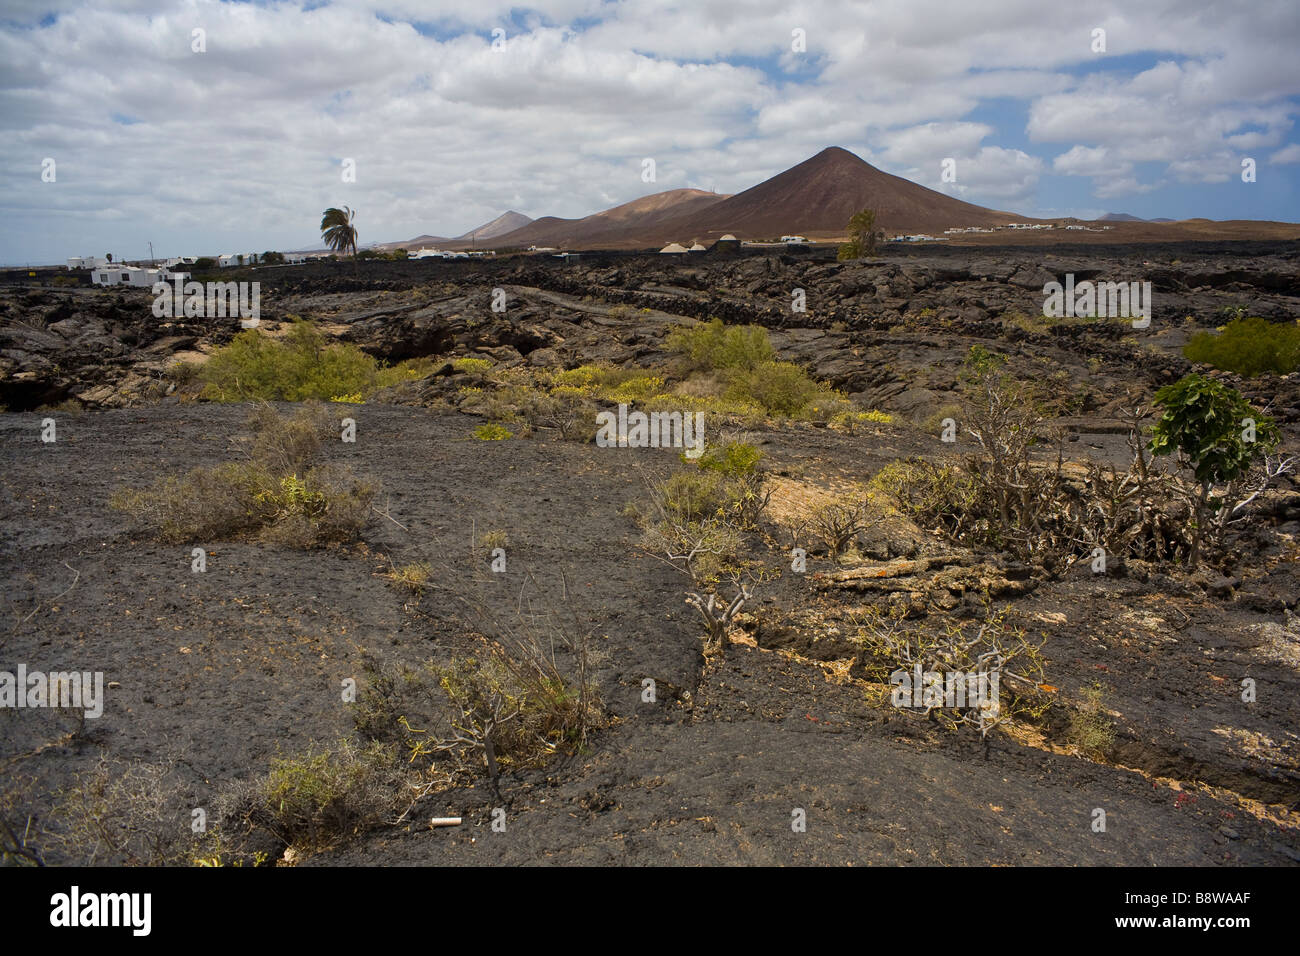 The village of Tahiche lost in the volcanic plains of Lanzarote island. Stock Photo